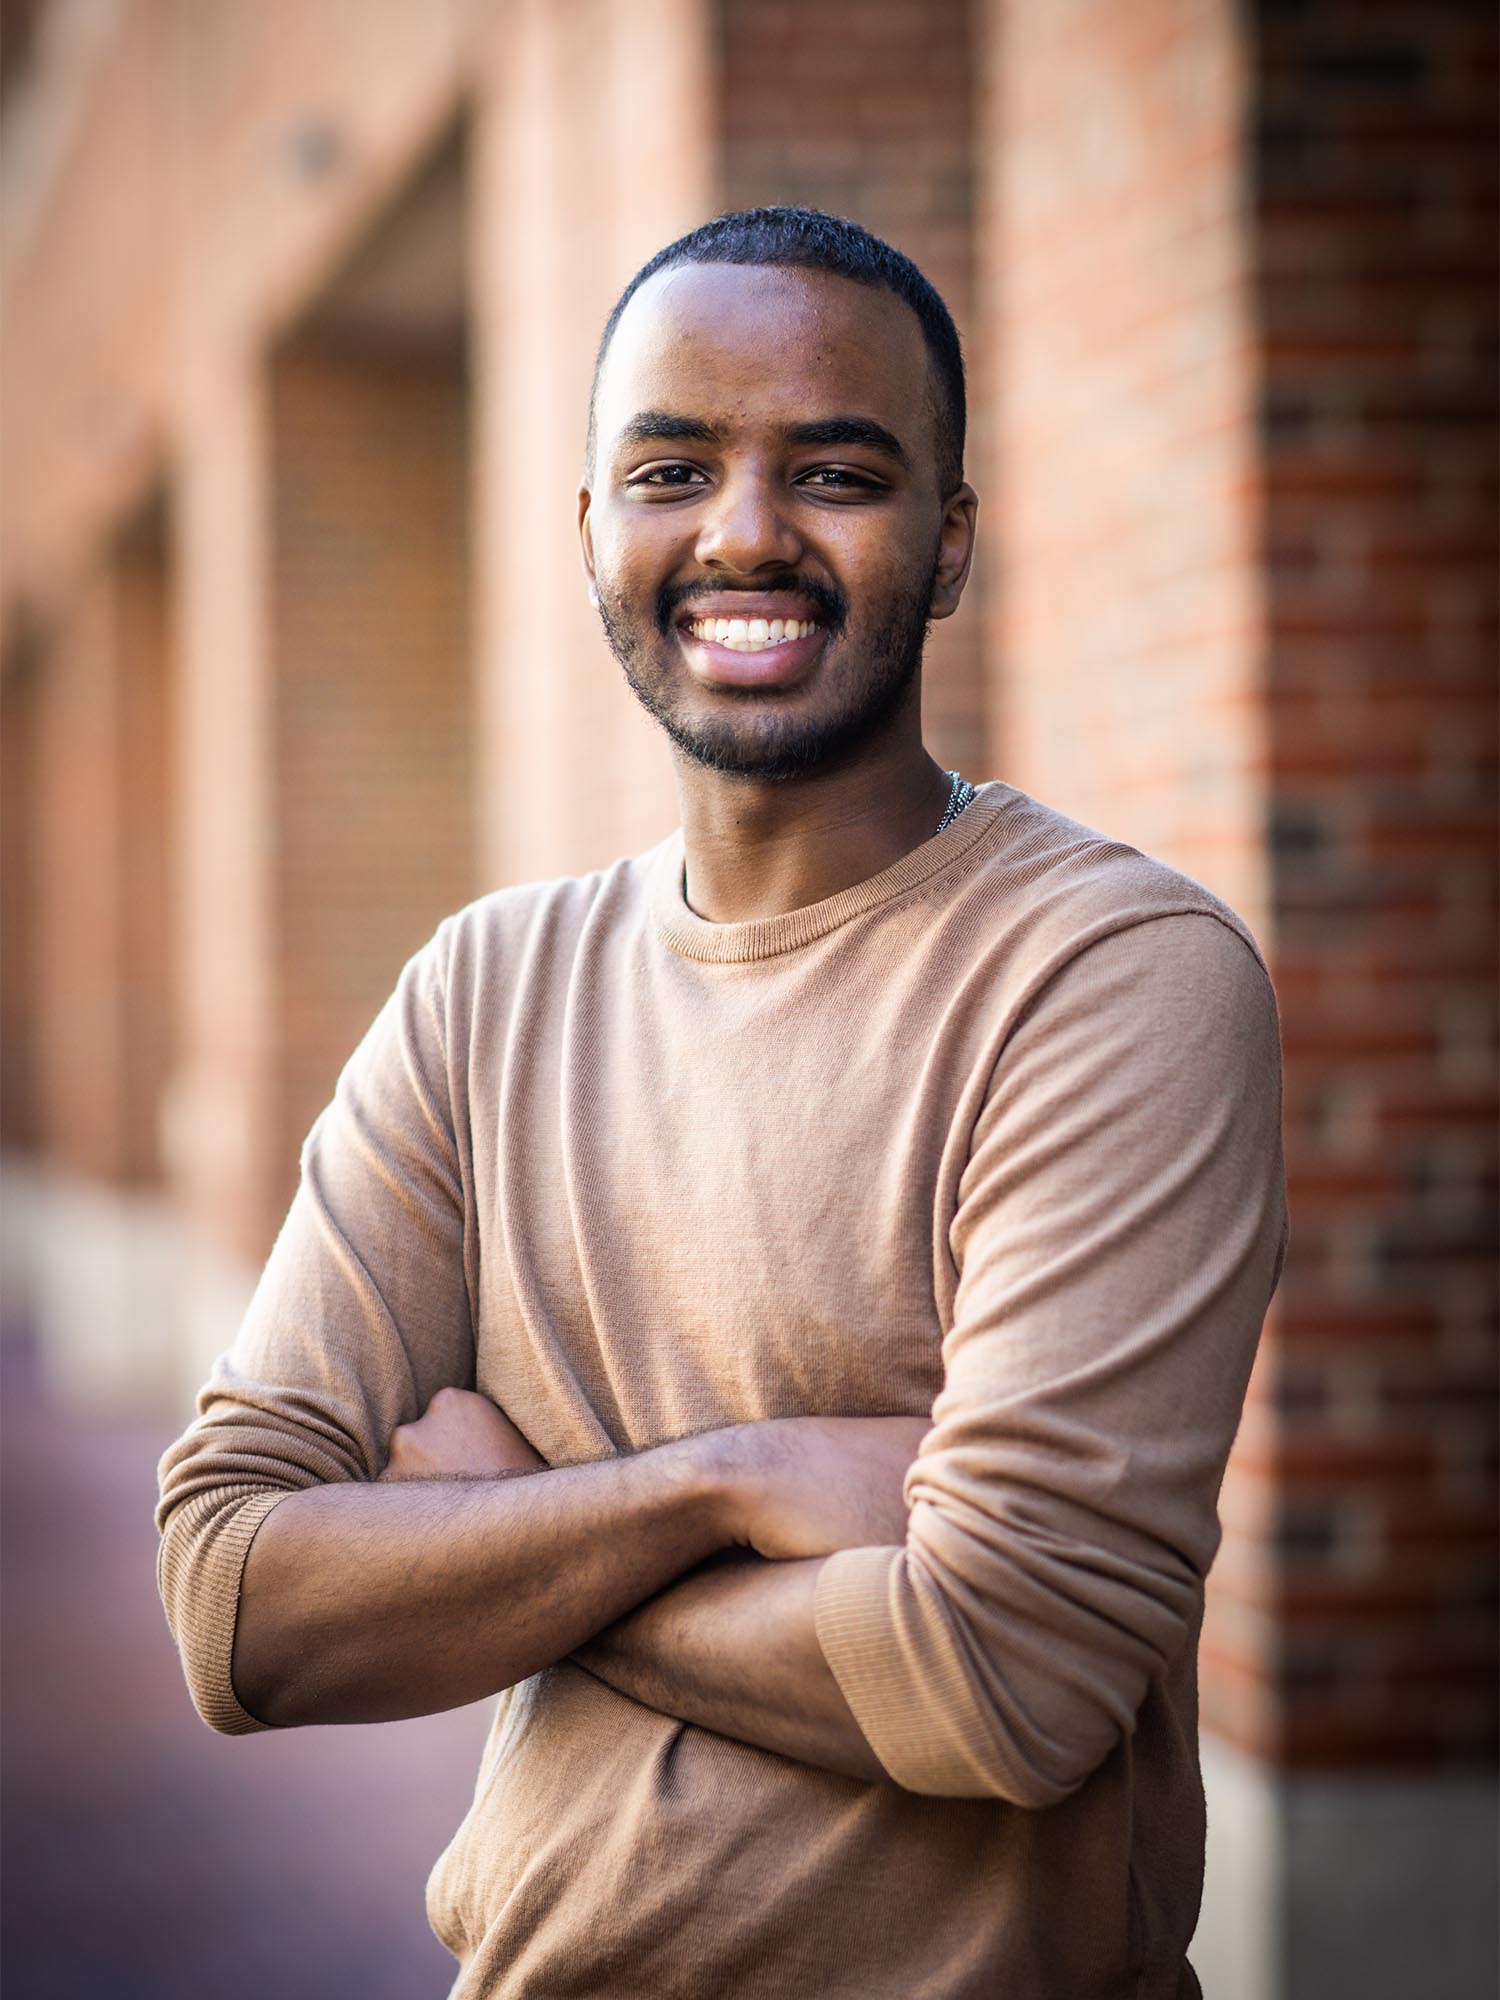 Photo: A young black man in a pink sweater stands with a smile and arms crossed